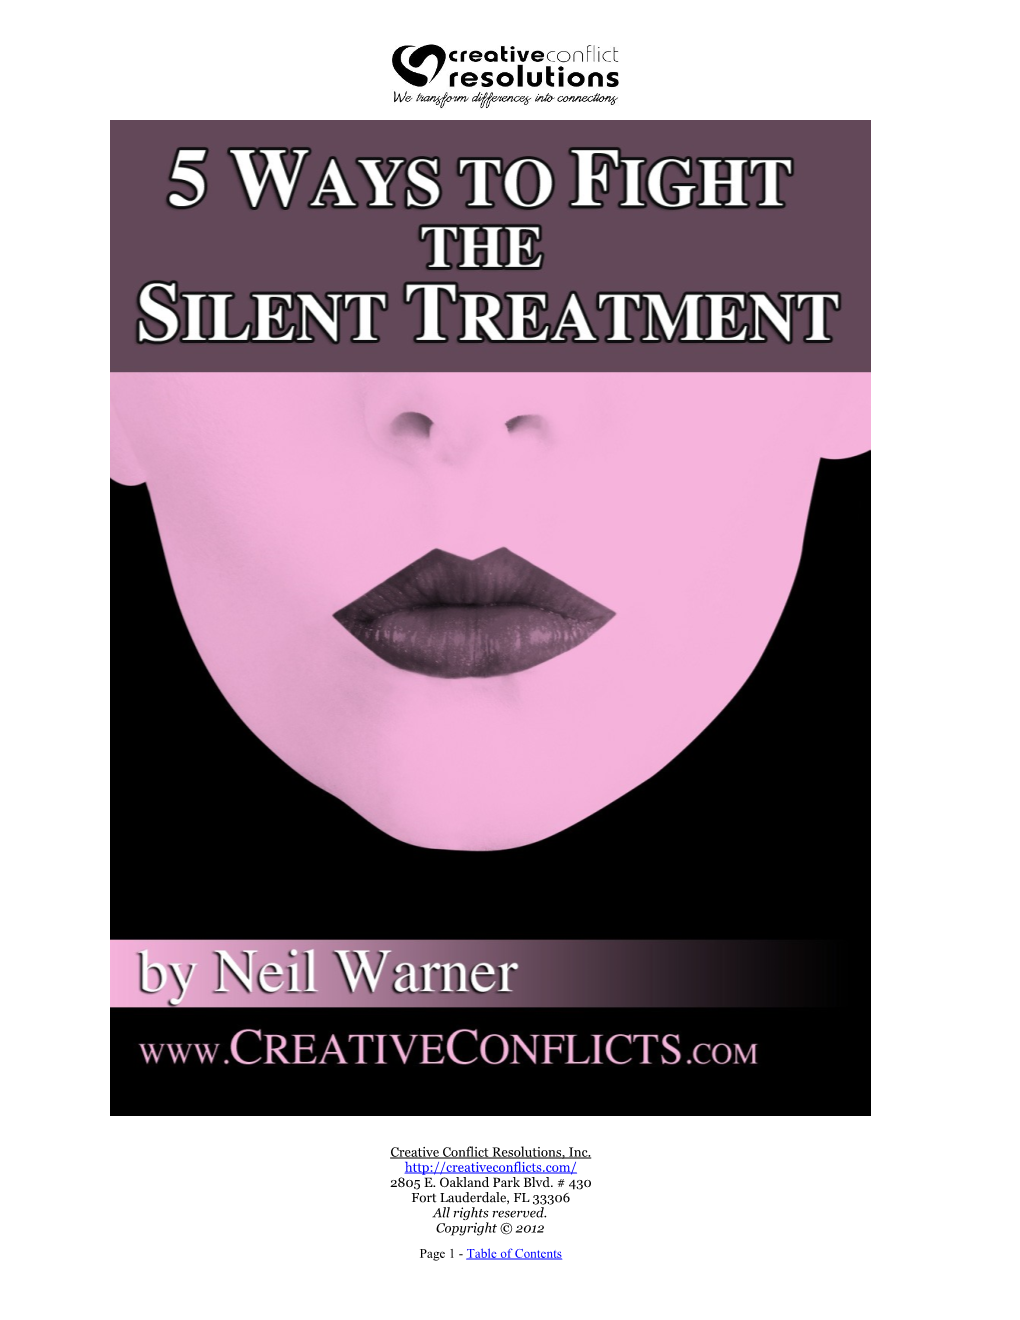 5 Ways to Fight the Silent Treatment”